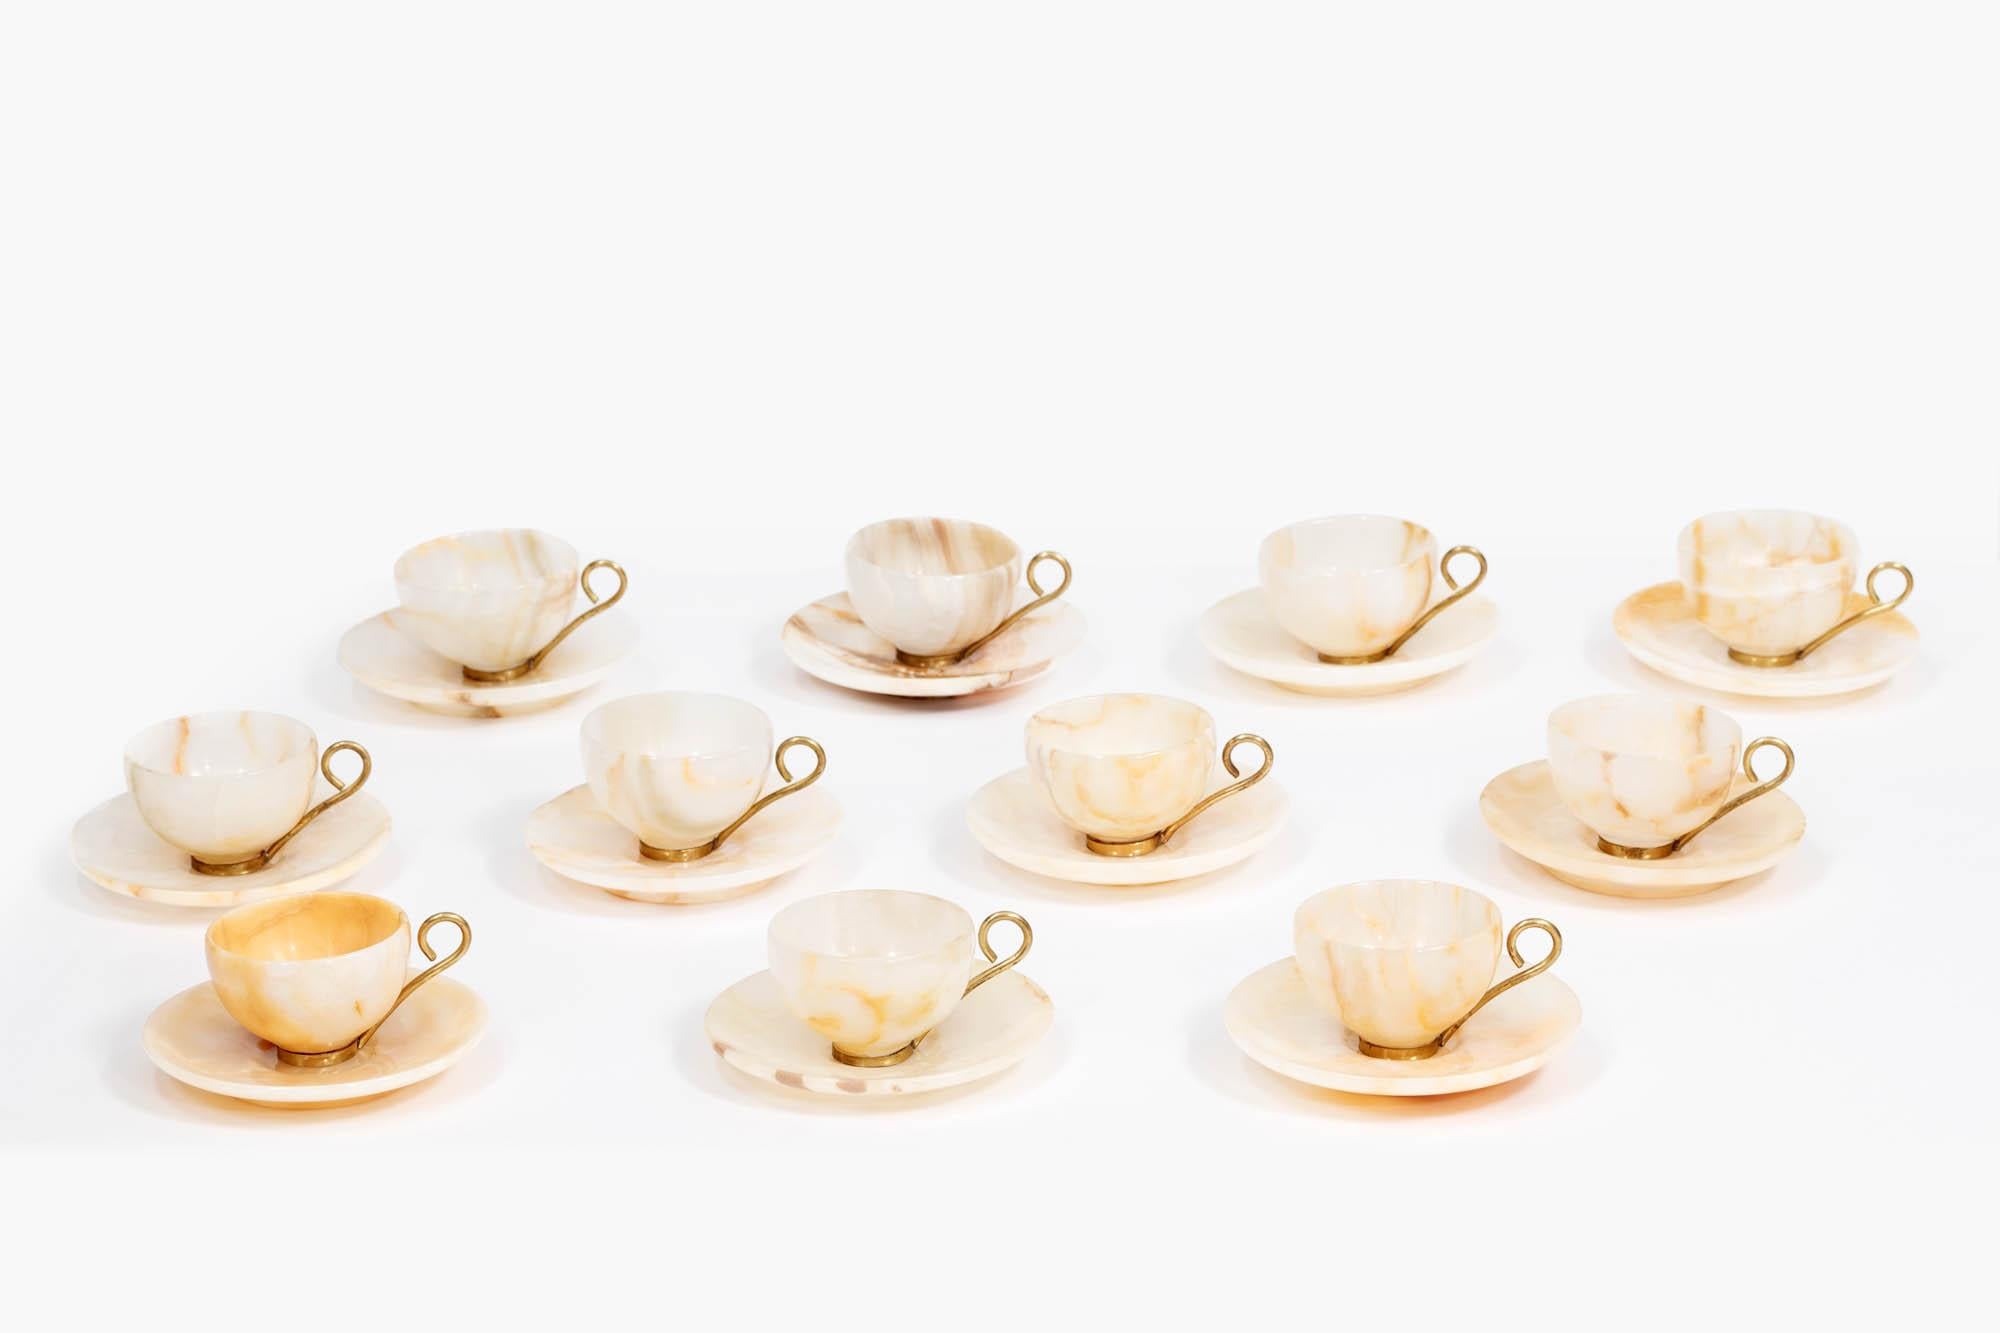 Early 20th Century set of eleven agate espresso cups and saucers complete with polished brass bases and handles. Likely Italian in origin, this set is exquisitely polished to a smooth finish with a delicate, thin transparency.